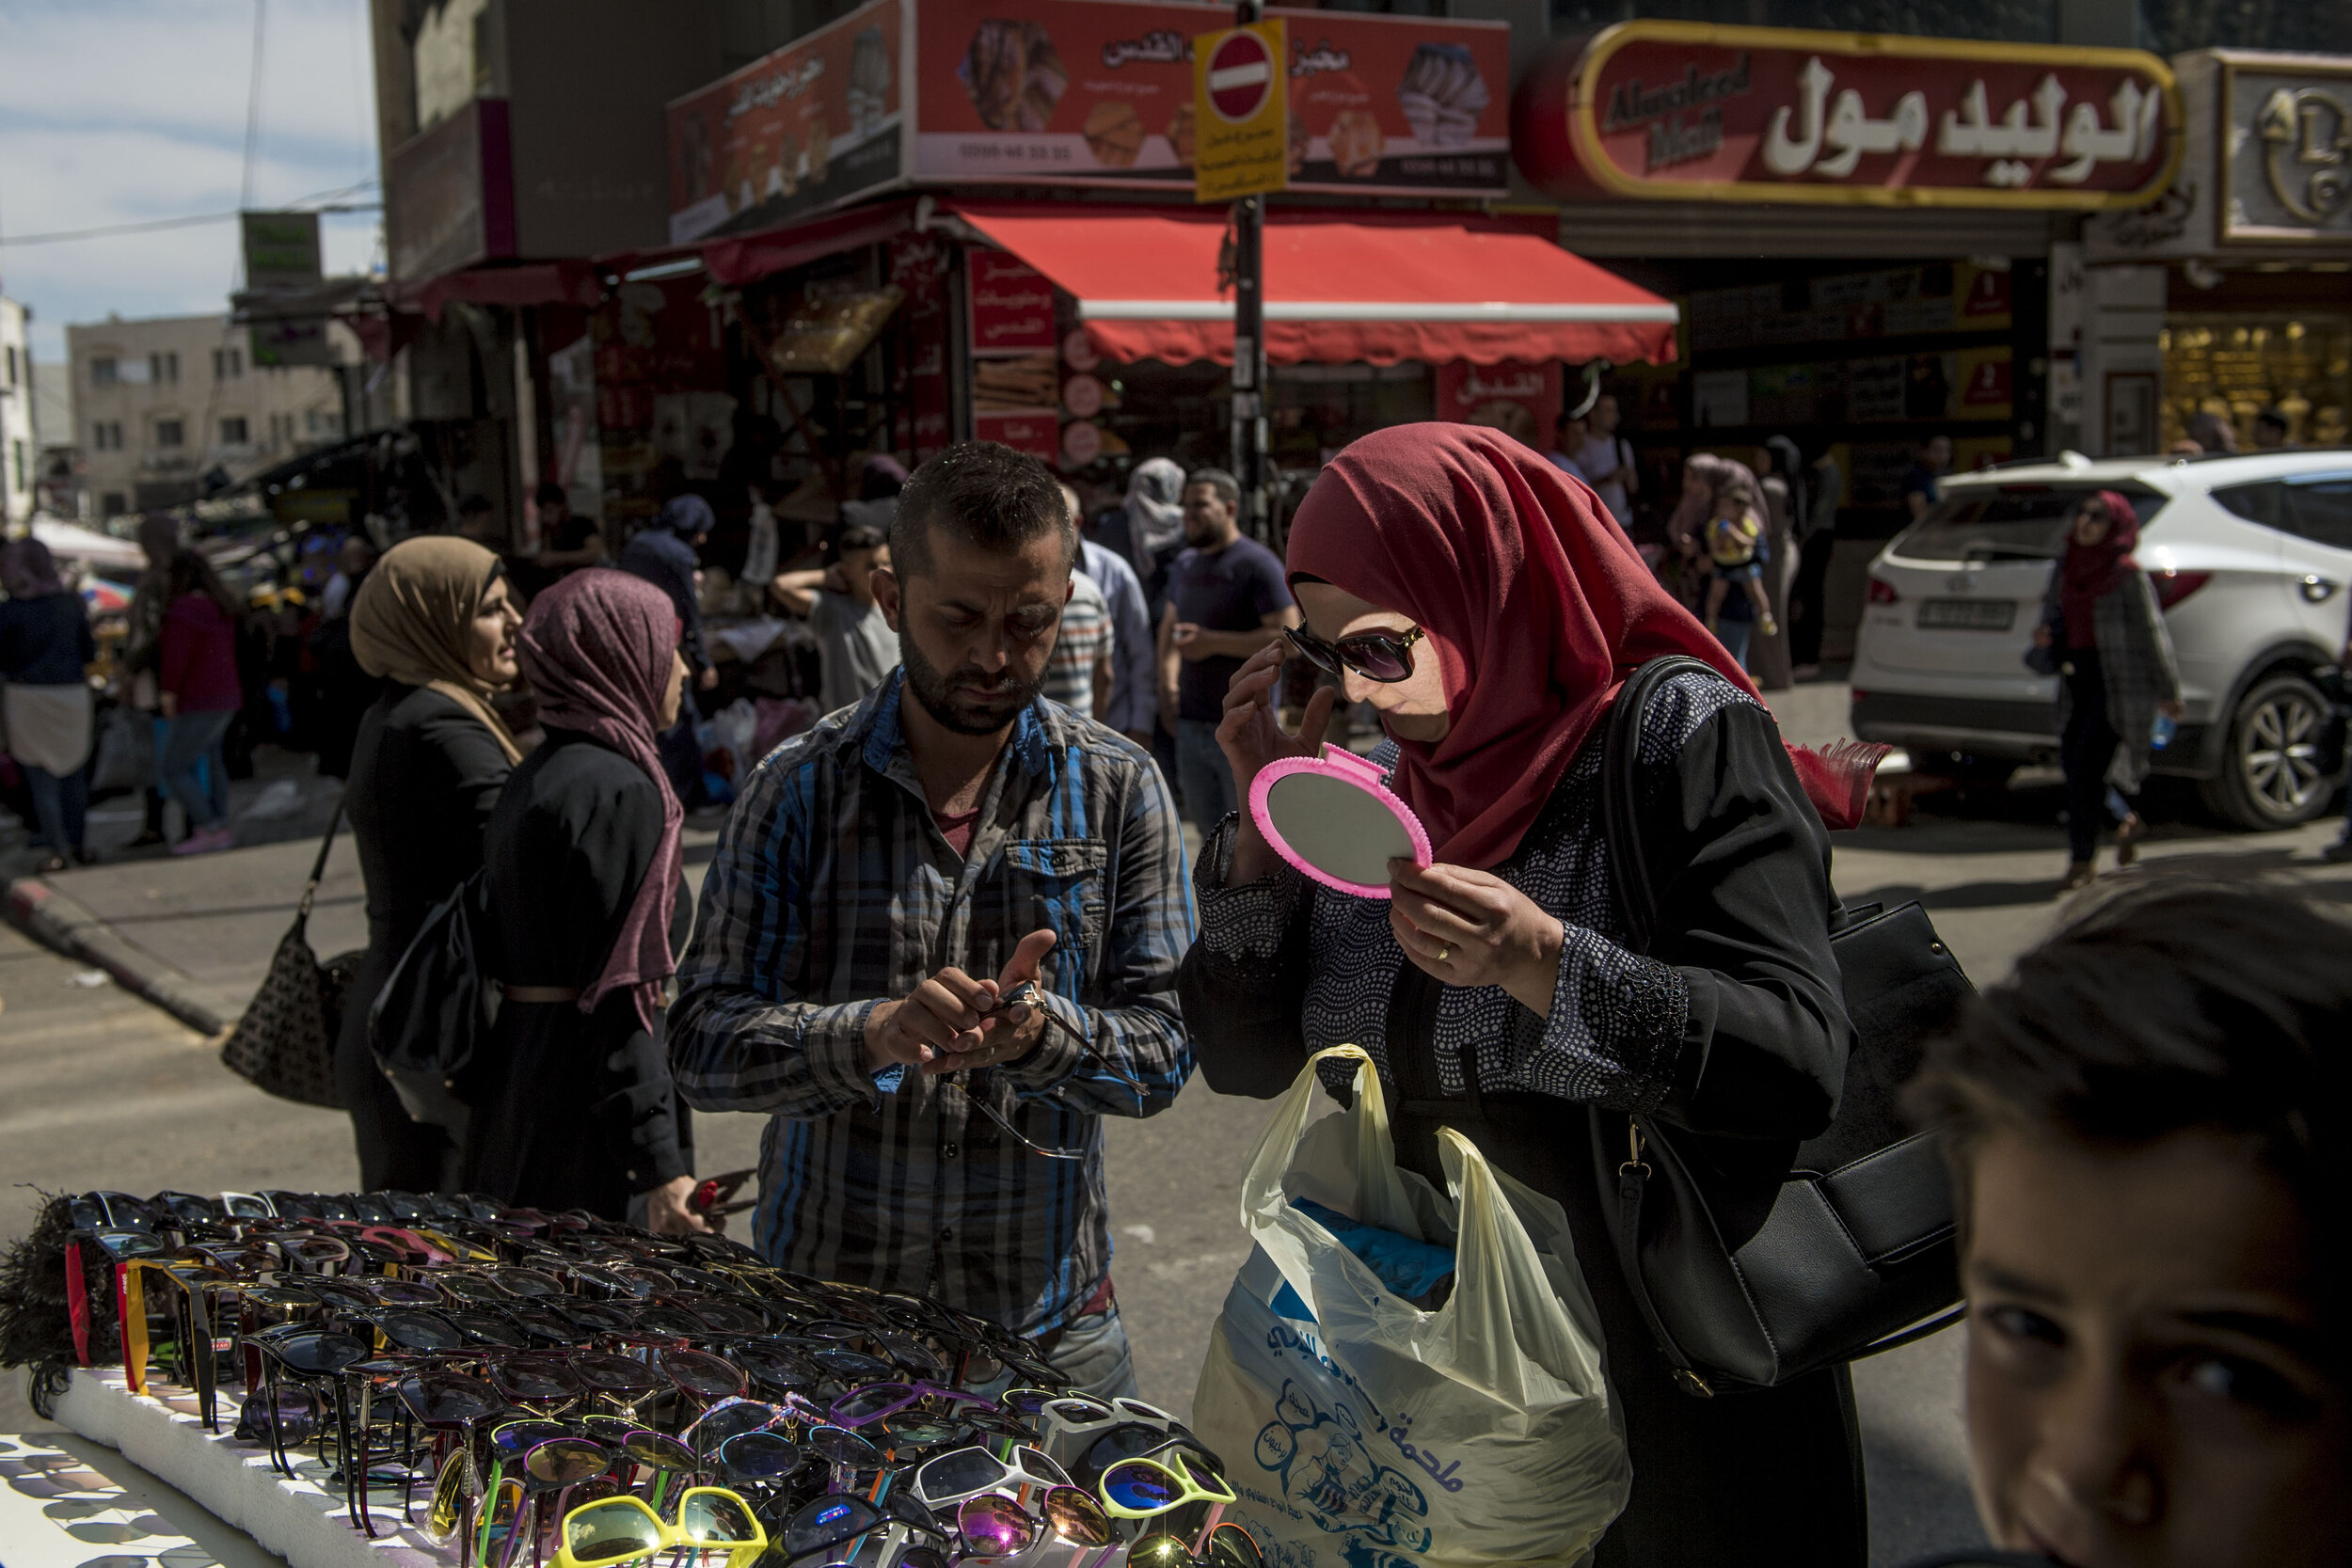  A Palestinian woman tries on sunglasses near Al-Minarra Square in Ramallah. Commercial retail has quickly taken over the economy of Ramallah which used to be dominated by farming. 